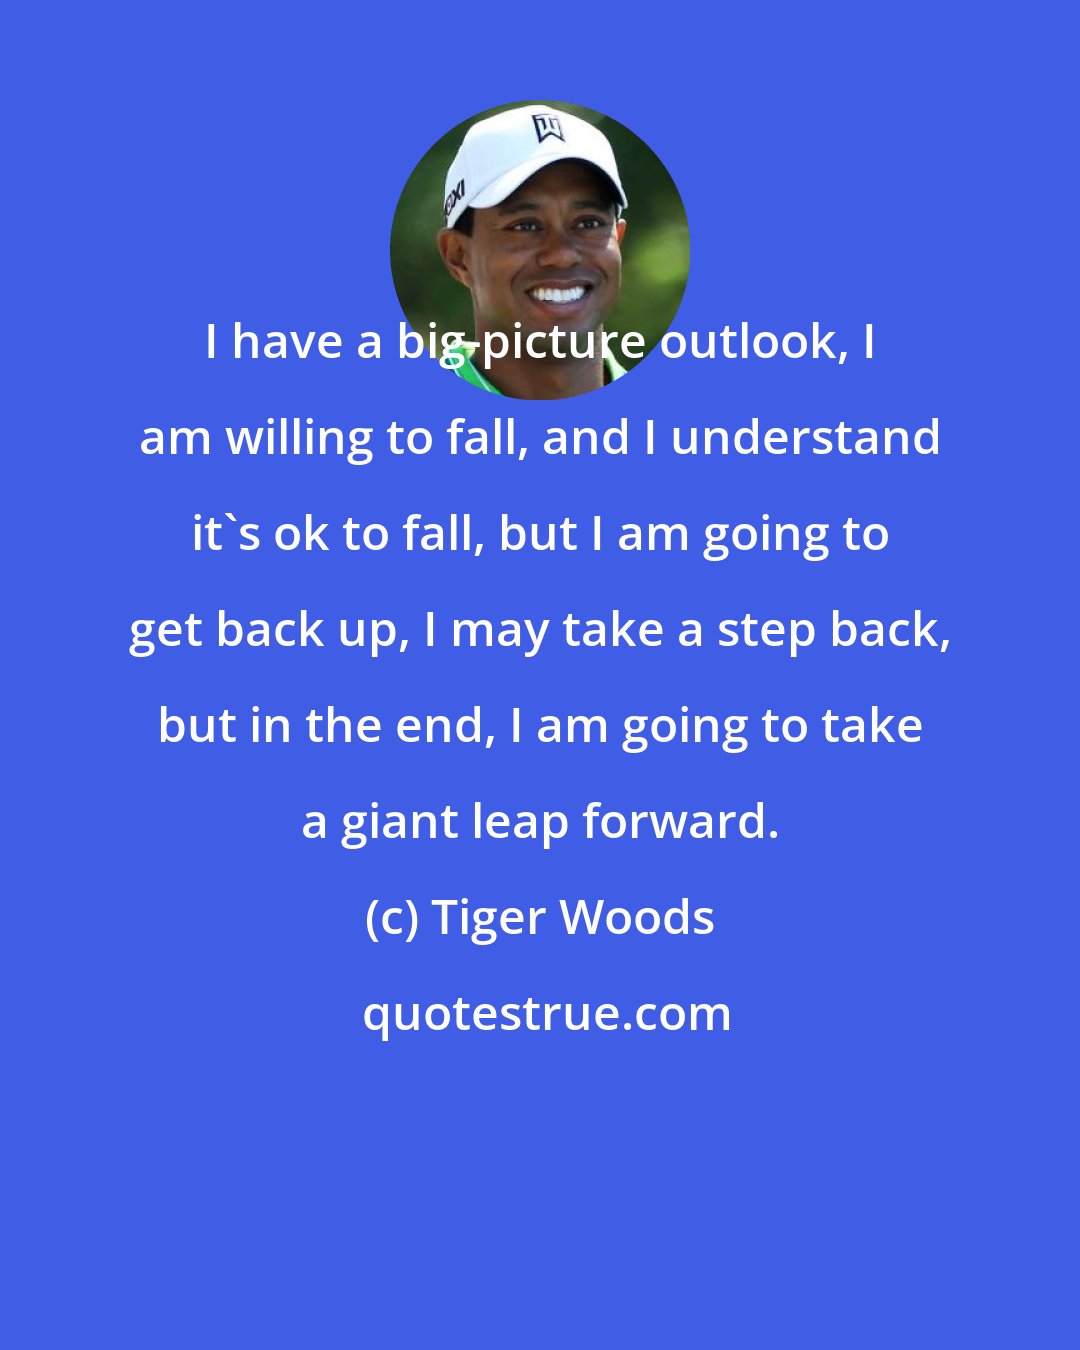 Tiger Woods: I have a big-picture outlook, I am willing to fall, and I understand it's ok to fall, but I am going to get back up, I may take a step back, but in the end, I am going to take a giant leap forward.